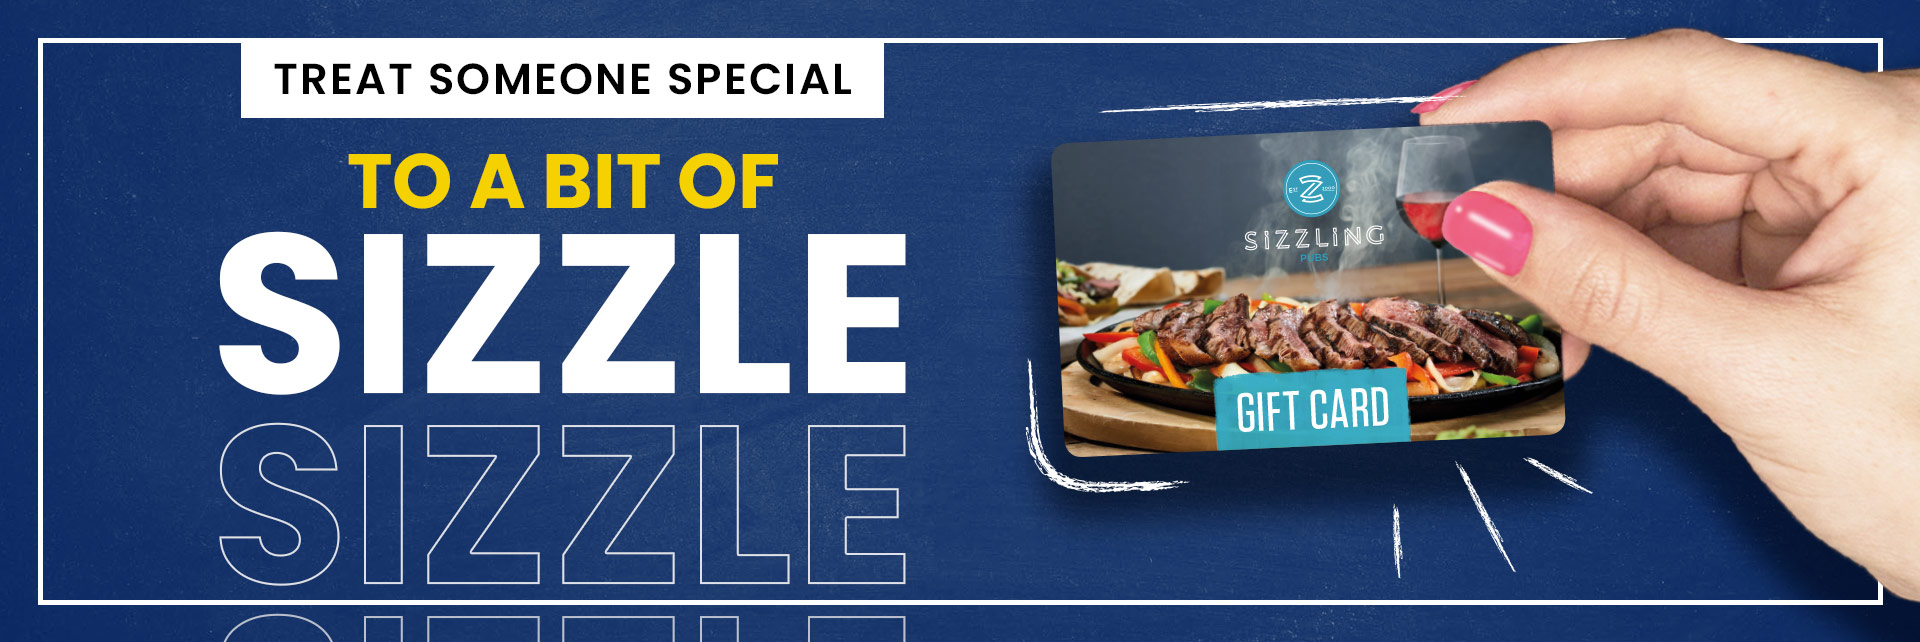 Sizzling Pubs Gift Card at Saracens Head in Solihull